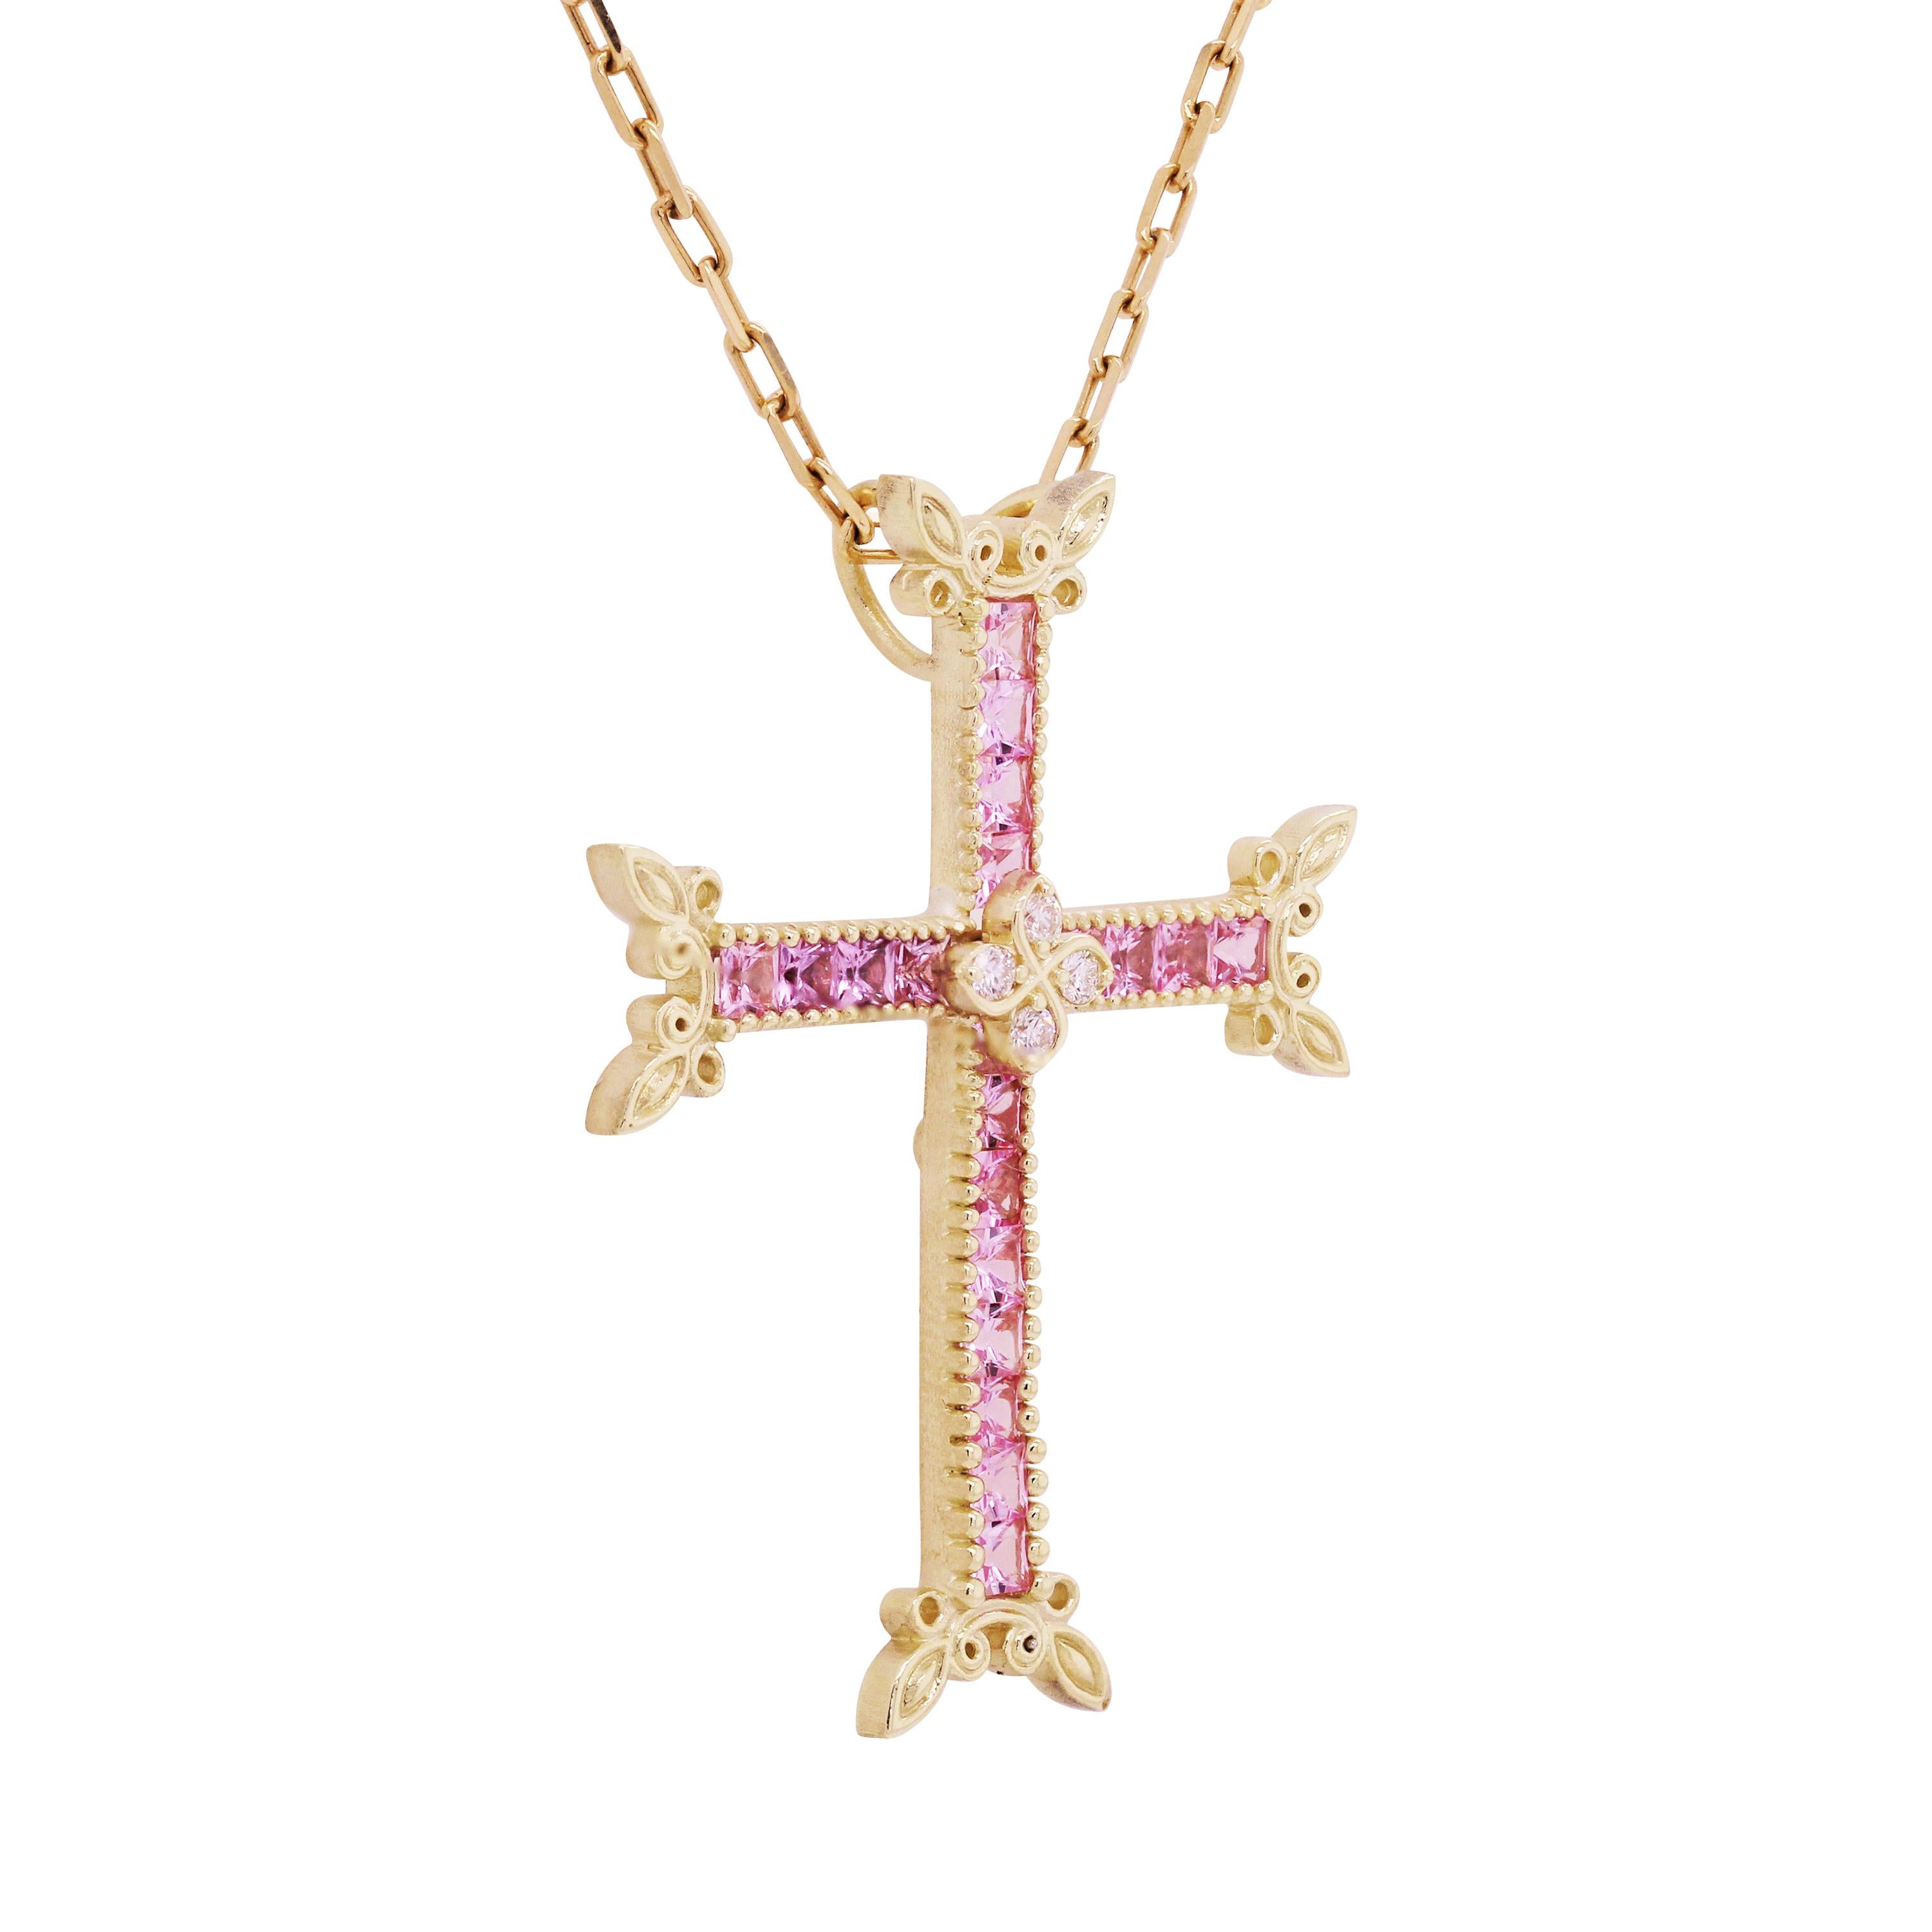 Stambolian 18K Gold Diamond Princess Cut Pink Sapphires Cross Pendant Necklace In New Condition For Sale In Boca Raton, FL